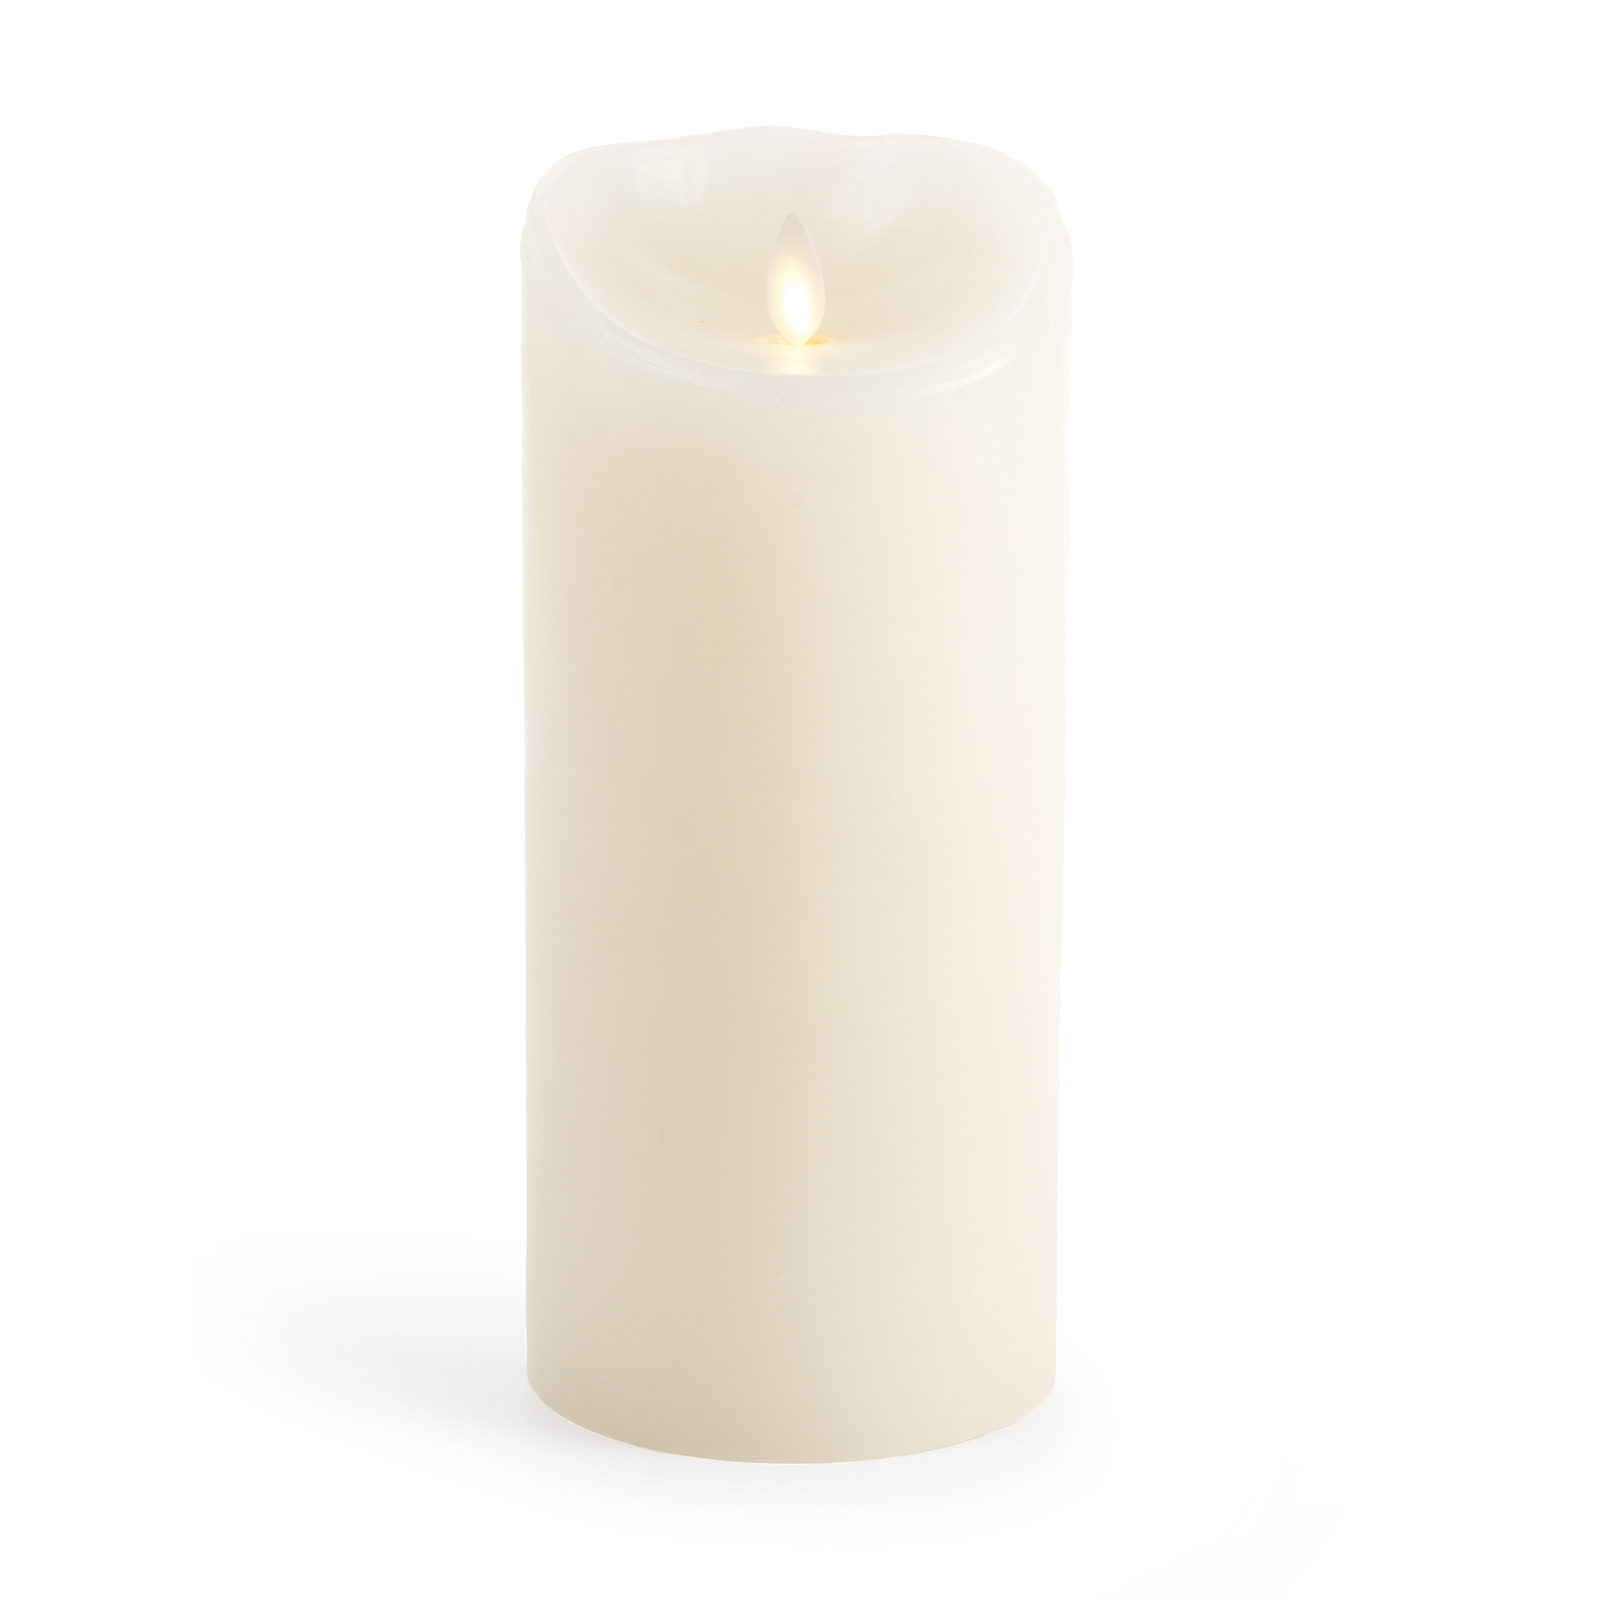 Darice Luminara Flameless Candle: Unscented Moving Flame Candle with Timer (9" I - $116.50